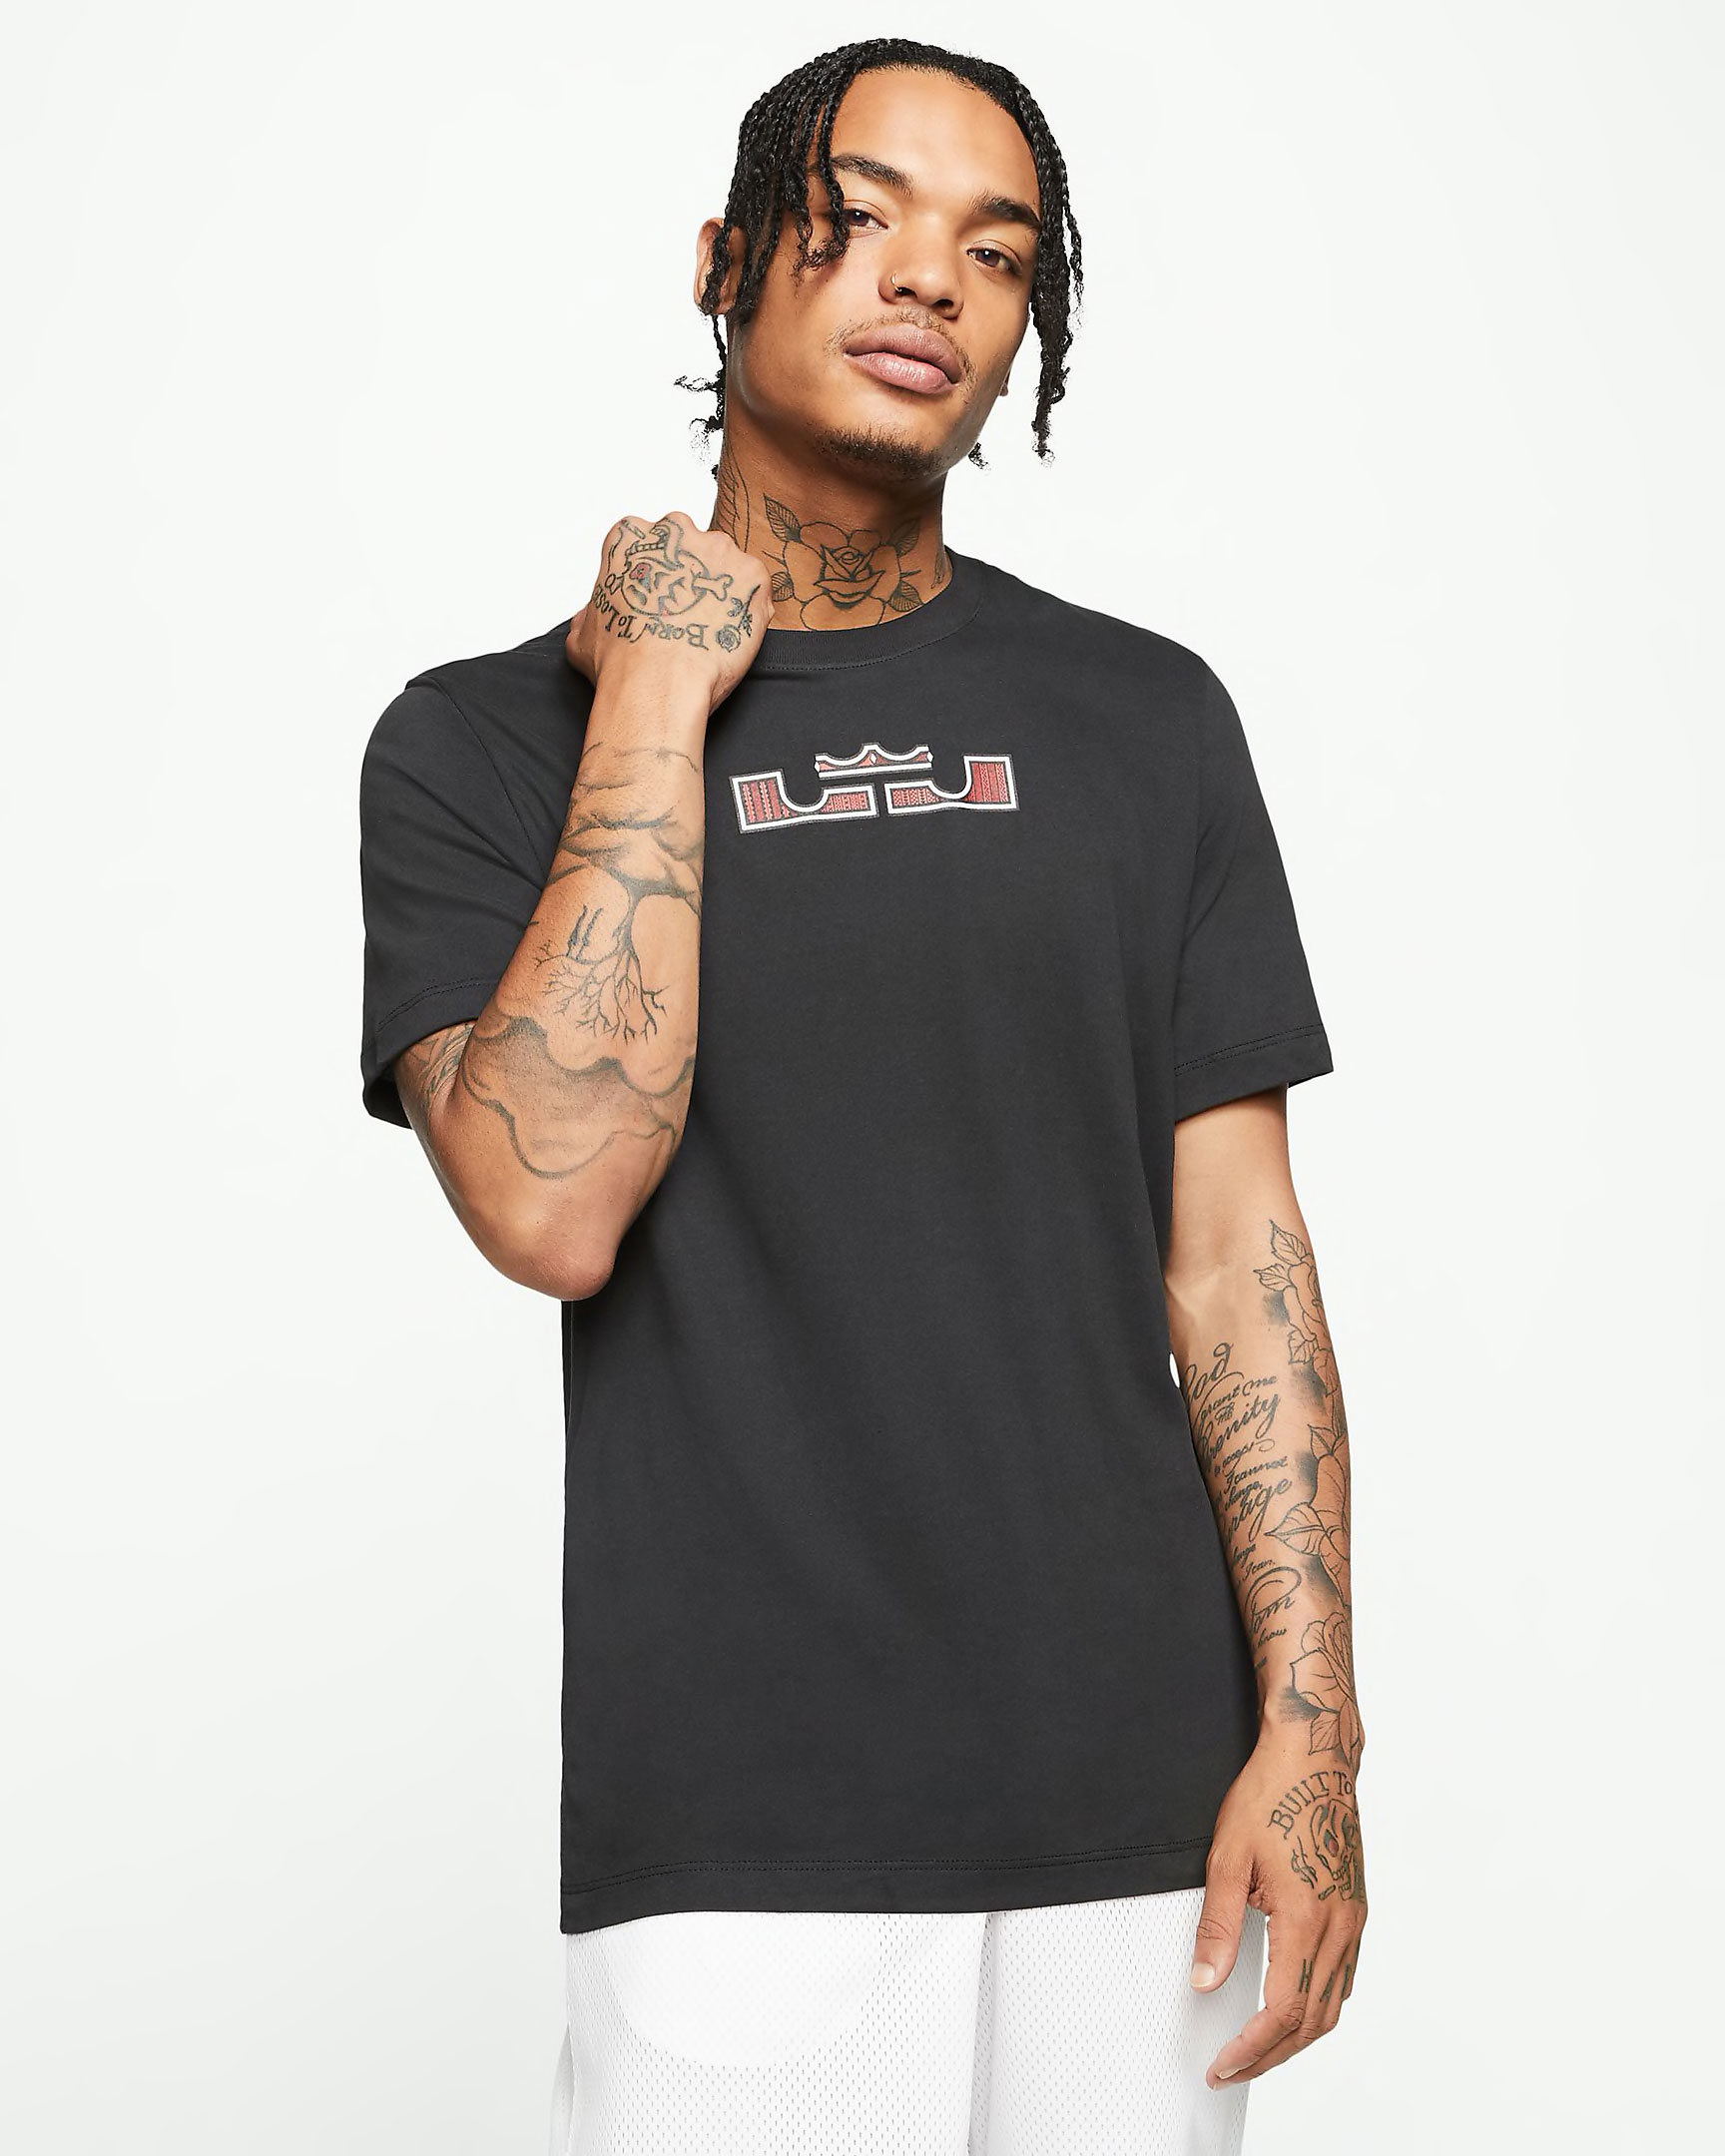 Nike LeBron 17 Low Bred Shirts to Match | SneakerFits.com